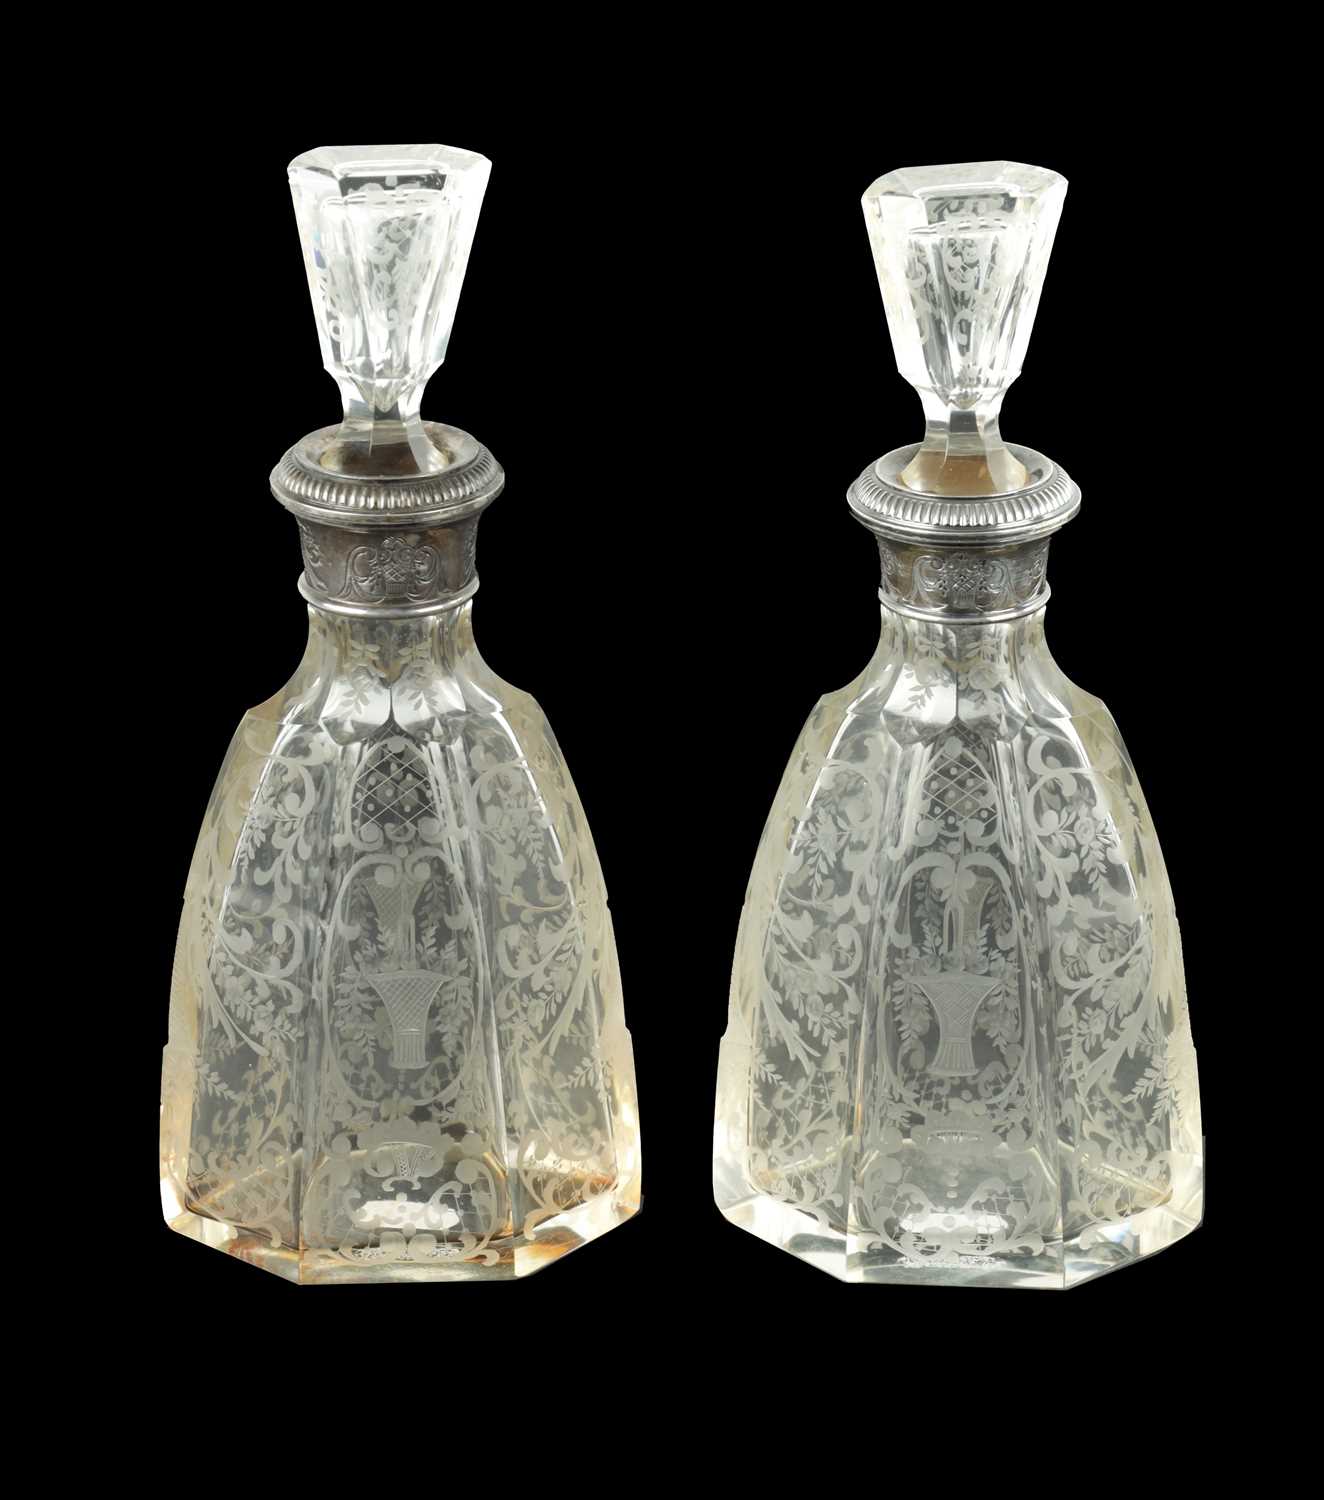 A NEAR PAIR OF 19TH CENTURY SILVER TOPPED CUT GLASS DECANTERS